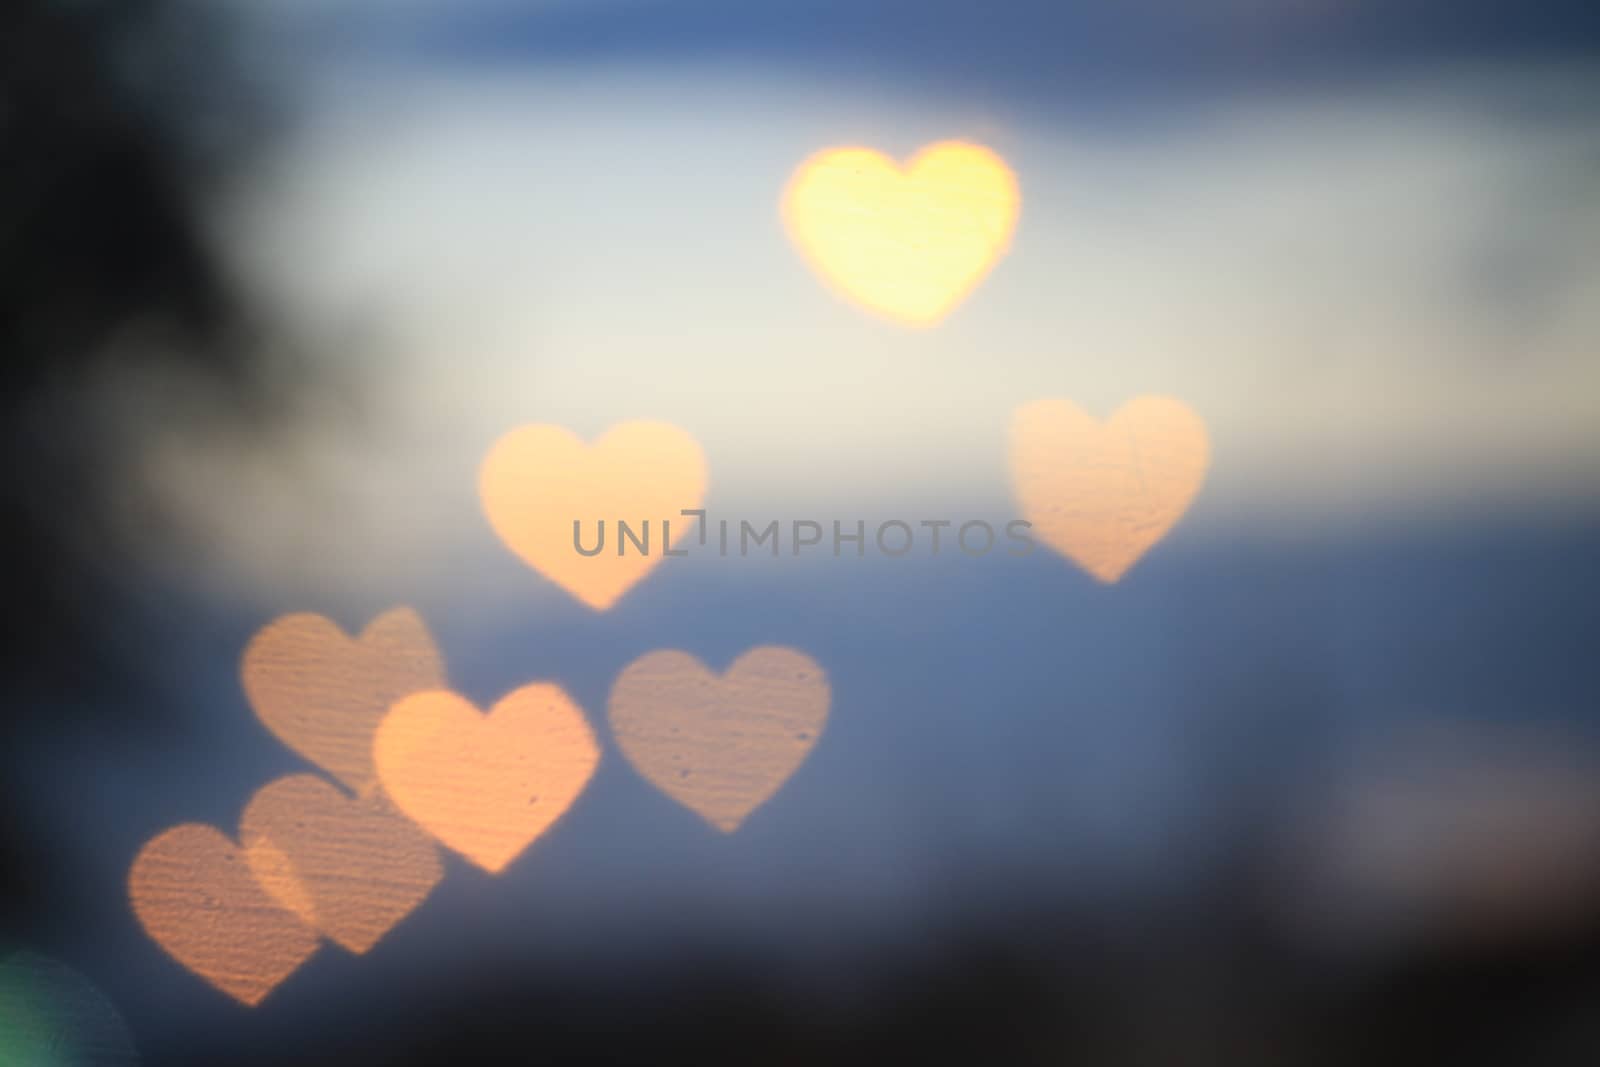 Yellow gold heart-shaped on black background Colorful lighting bokeh white for decoration at night backdrop wallpaper blurred valentine, Love Pictures background, Lighting heart shaped soft night by cgdeaw